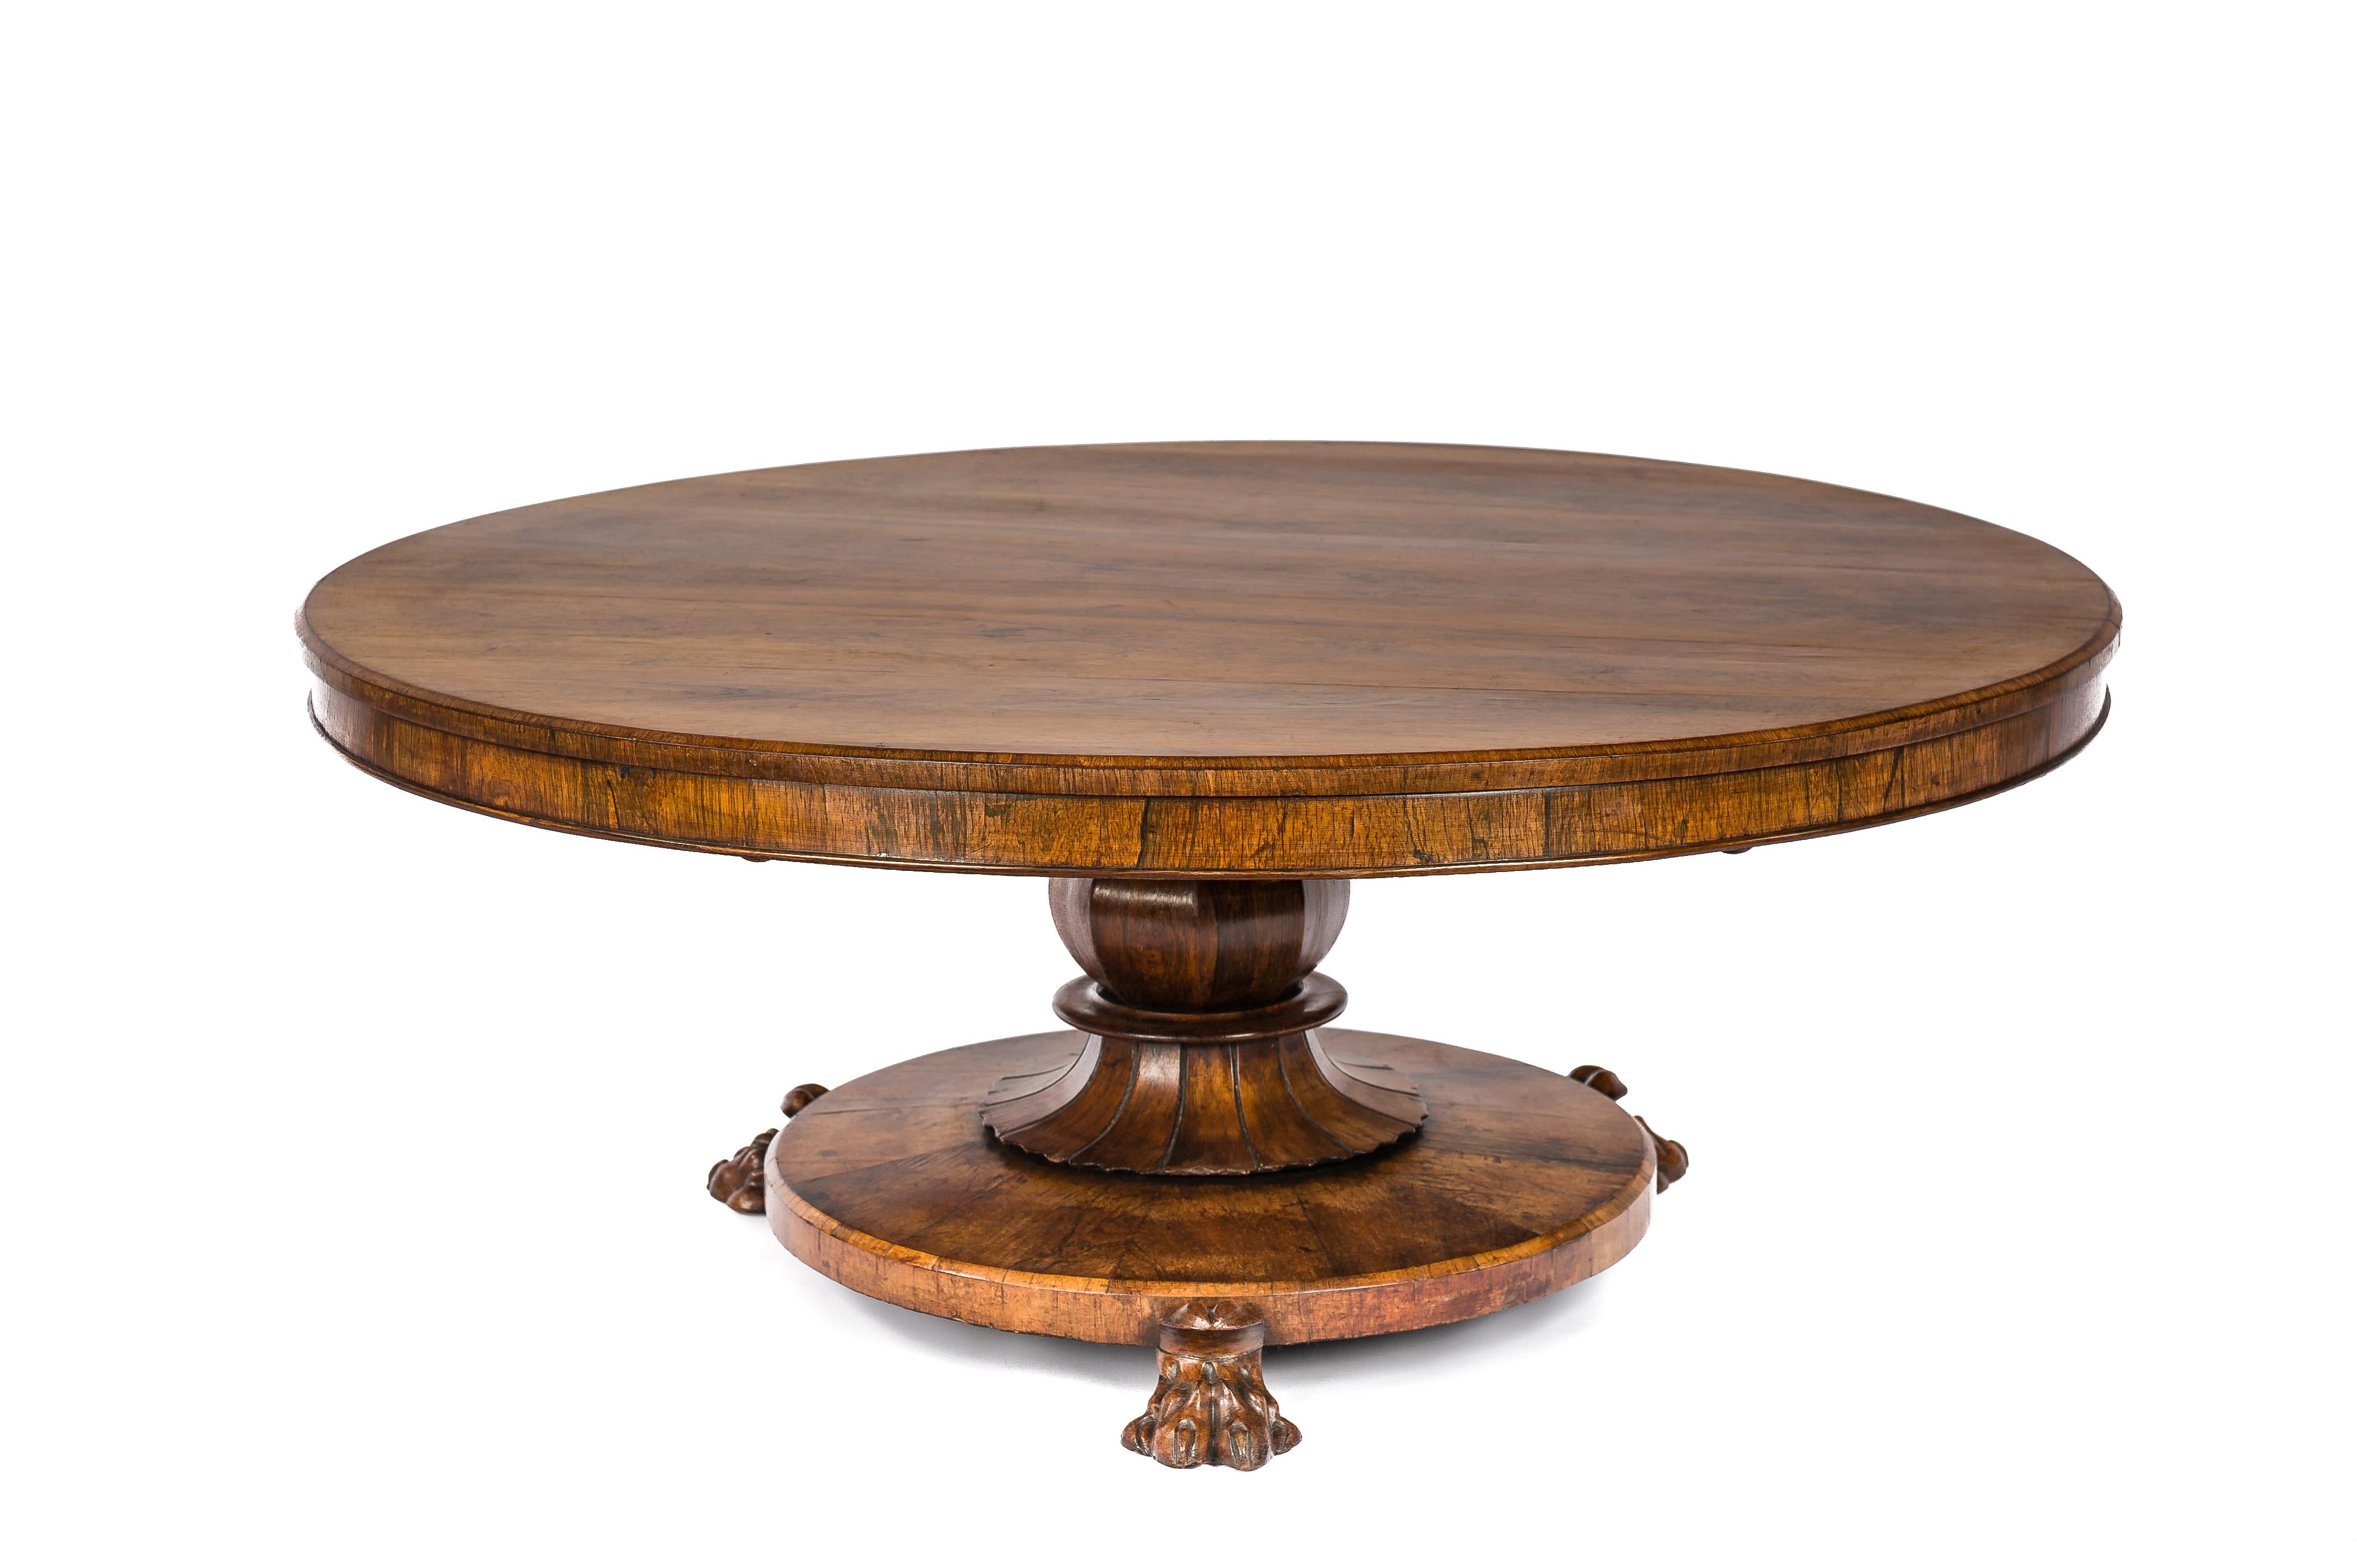 This beautiful round coffee table was made in France in the late 19th century, circa 1880. The top was veneered with exceptional walnut wood with a fantastic grain pattern. The veneer was laid in an “open book” manner and is therefore symmetrical. 